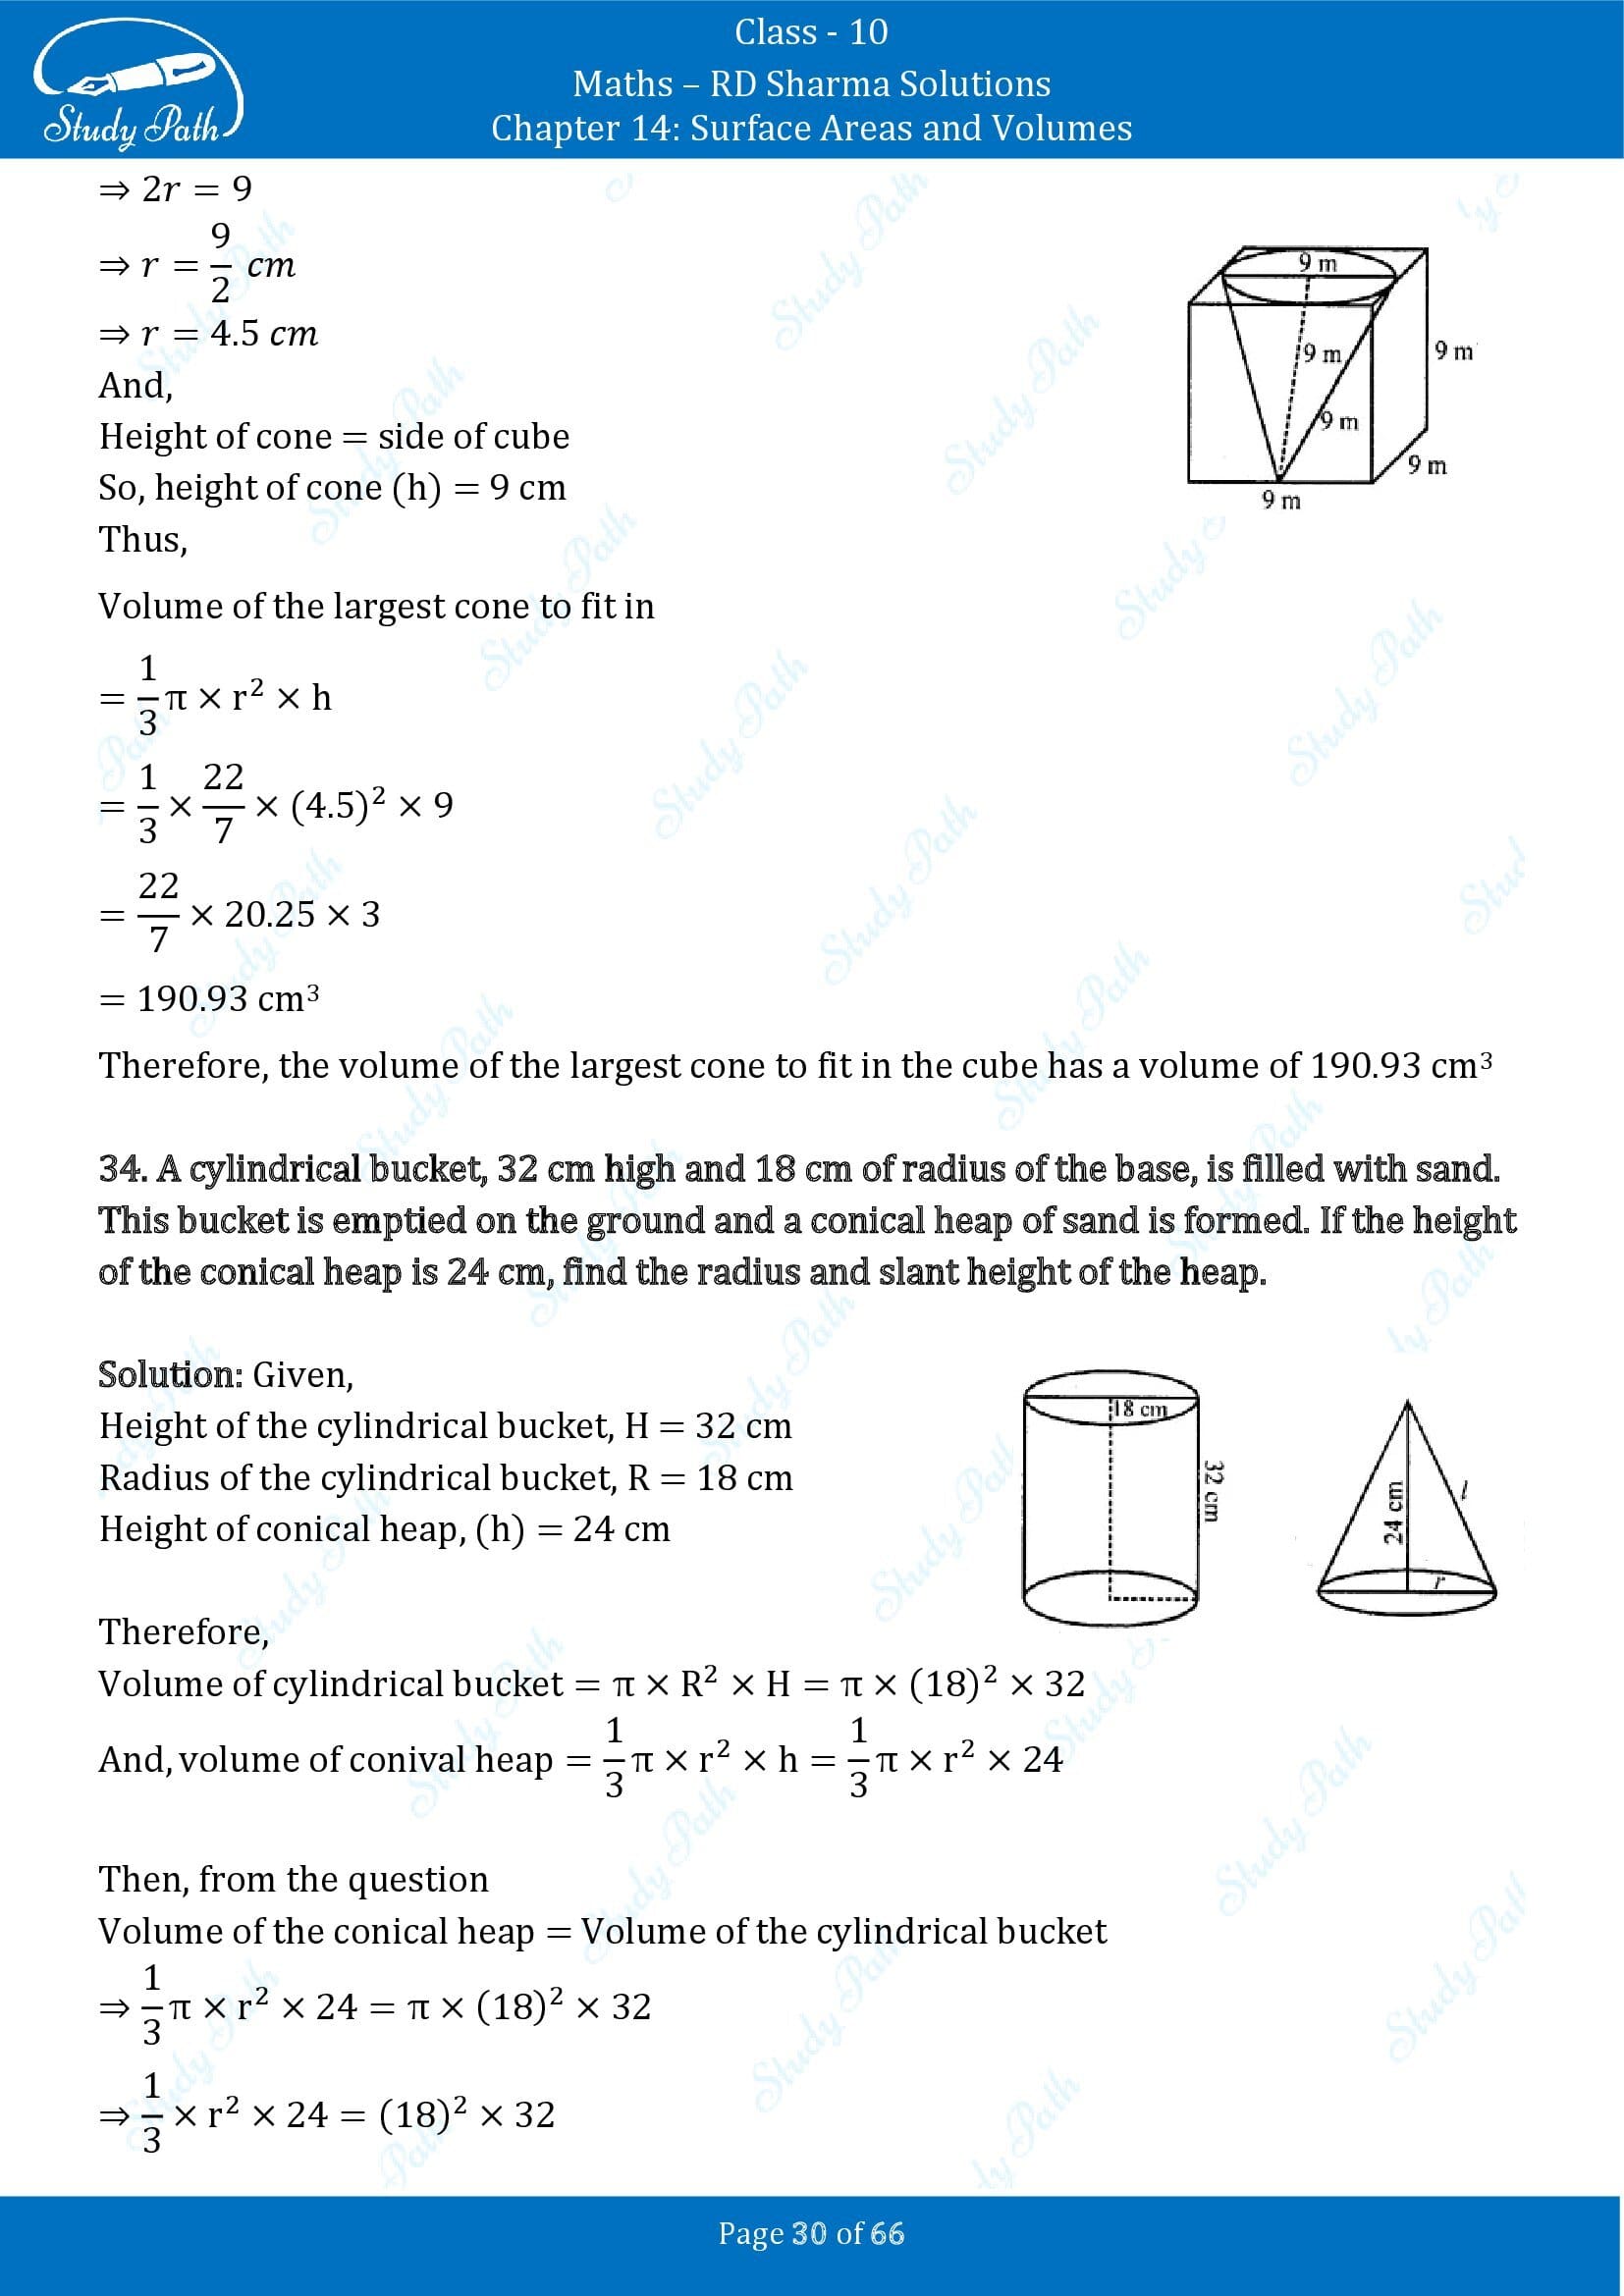 RD Sharma Solutions Class 10 Chapter 14 Surface Areas and Volumes Exercise 14.1 00030